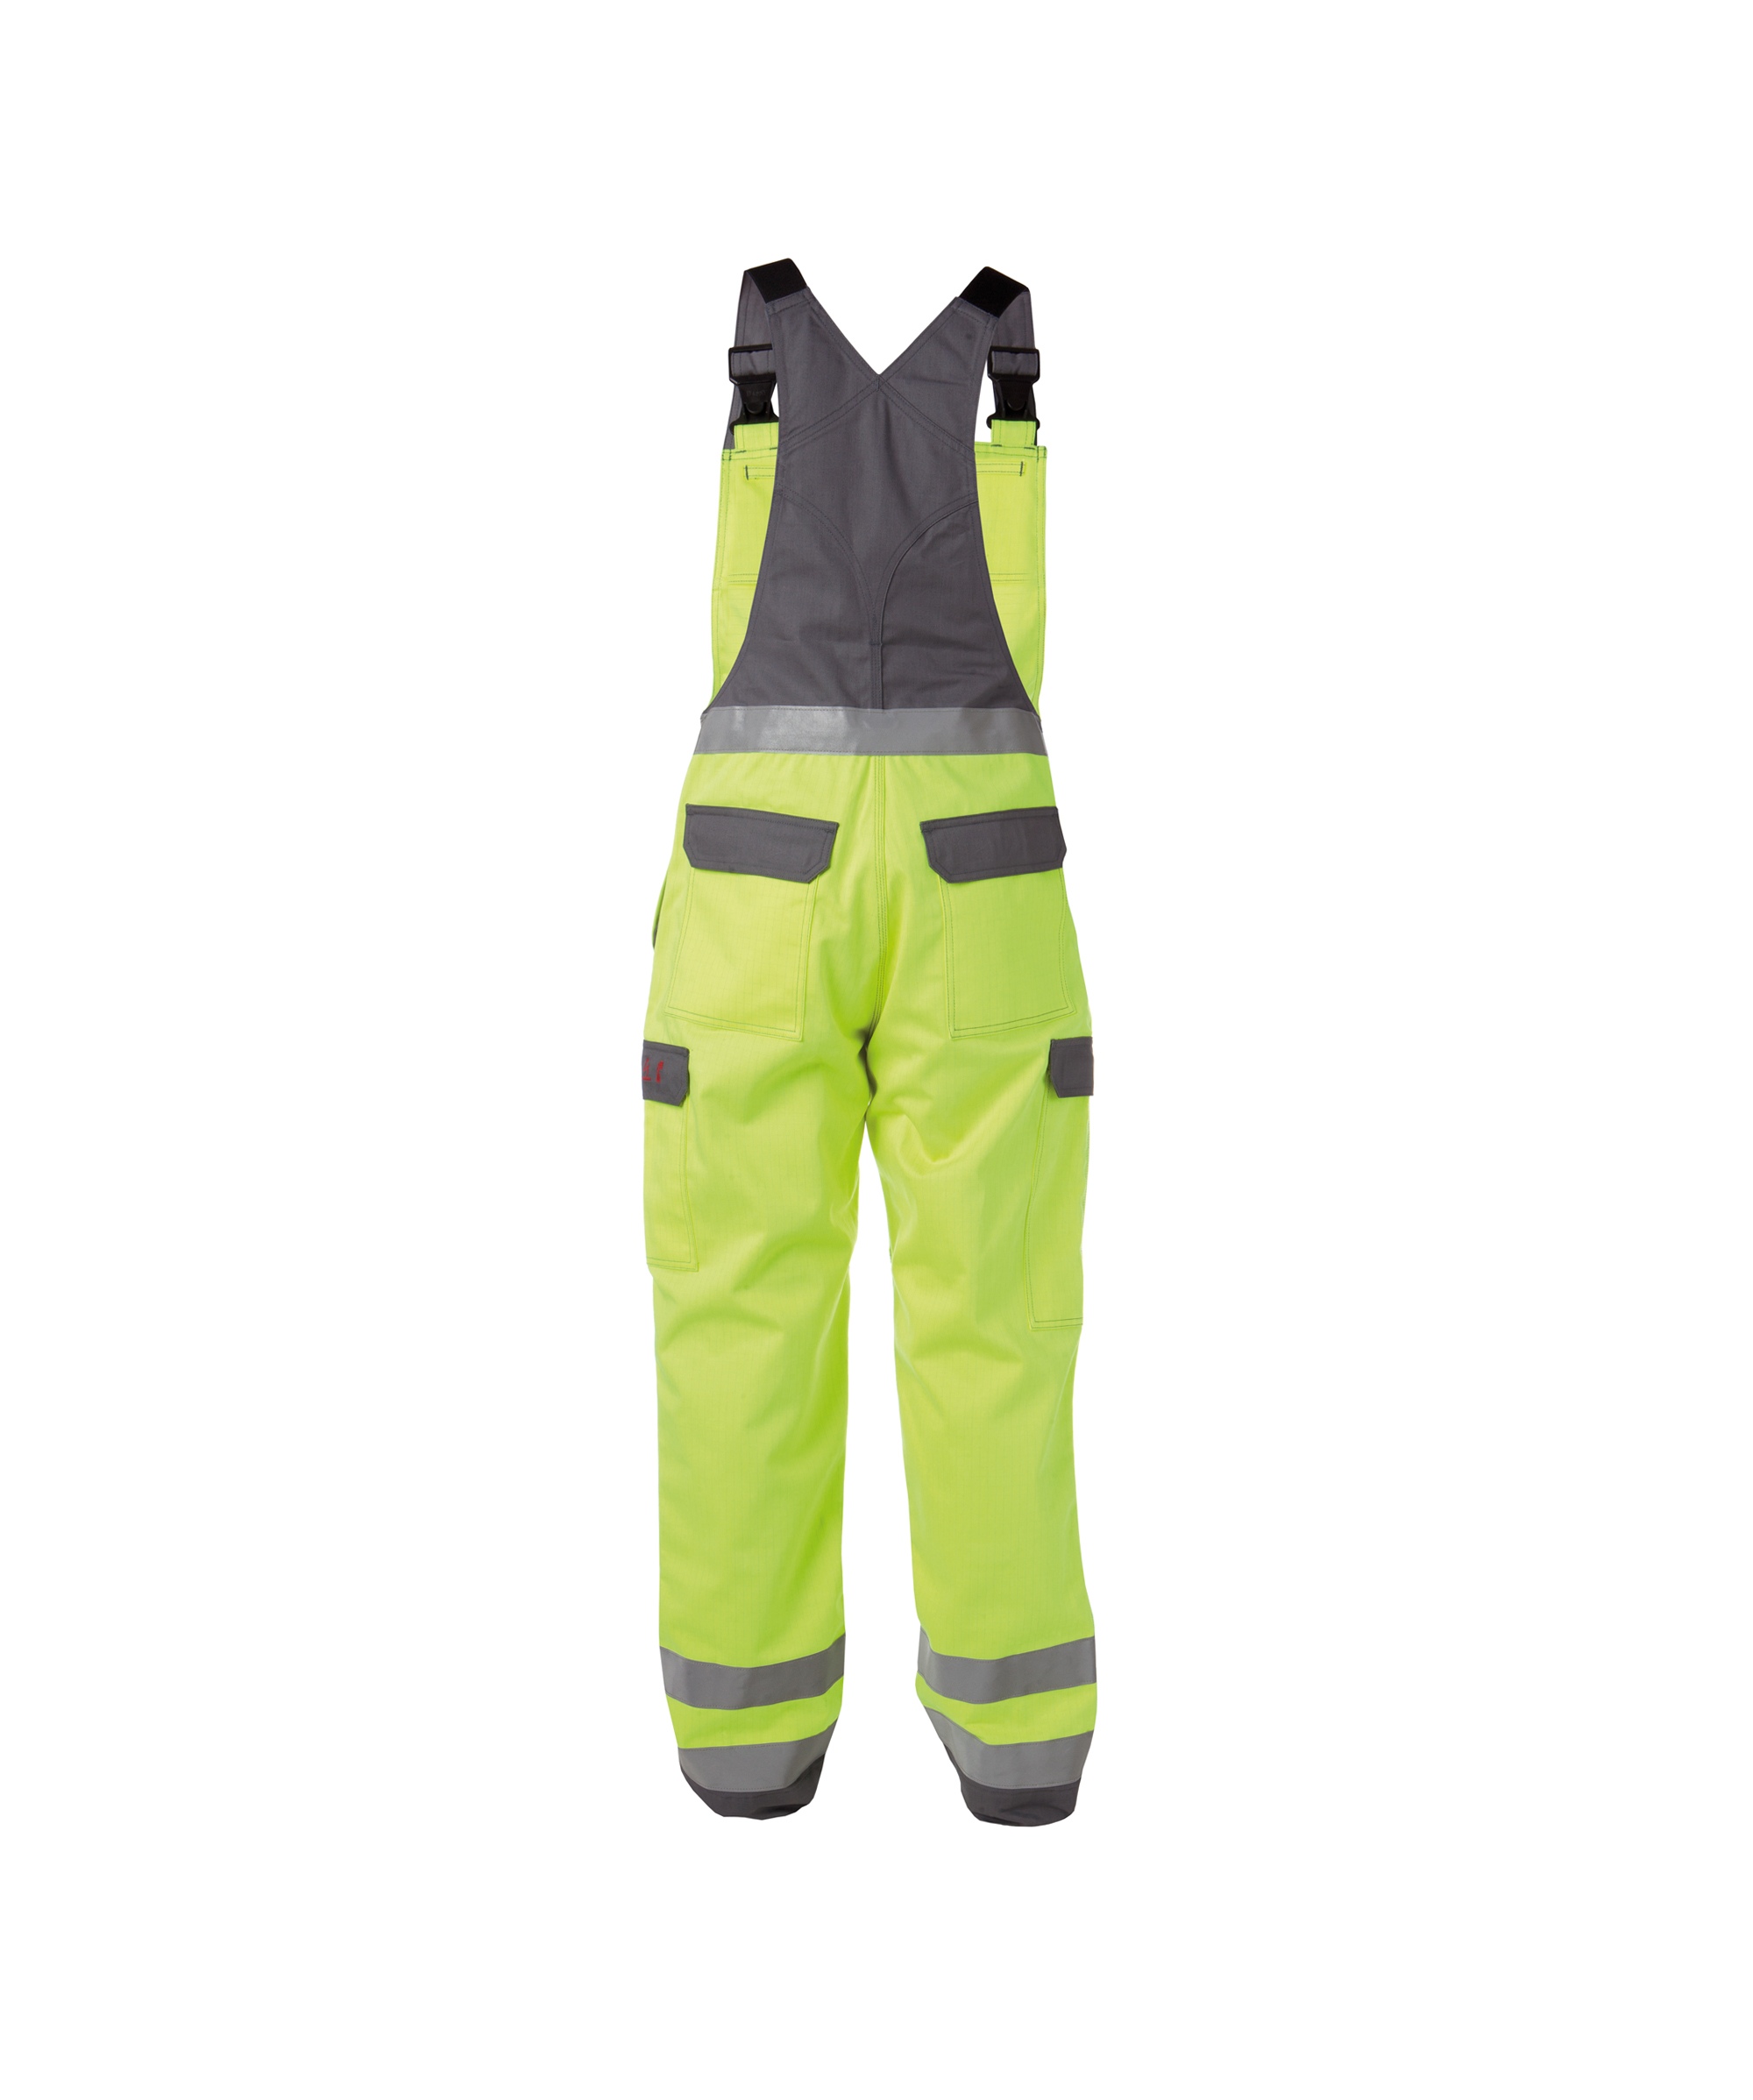 colombia_two-tone-multinorm-high-visibility-brace-overall-with-knee-pockets_fluo-yellow-graphite-grey_back.jpg